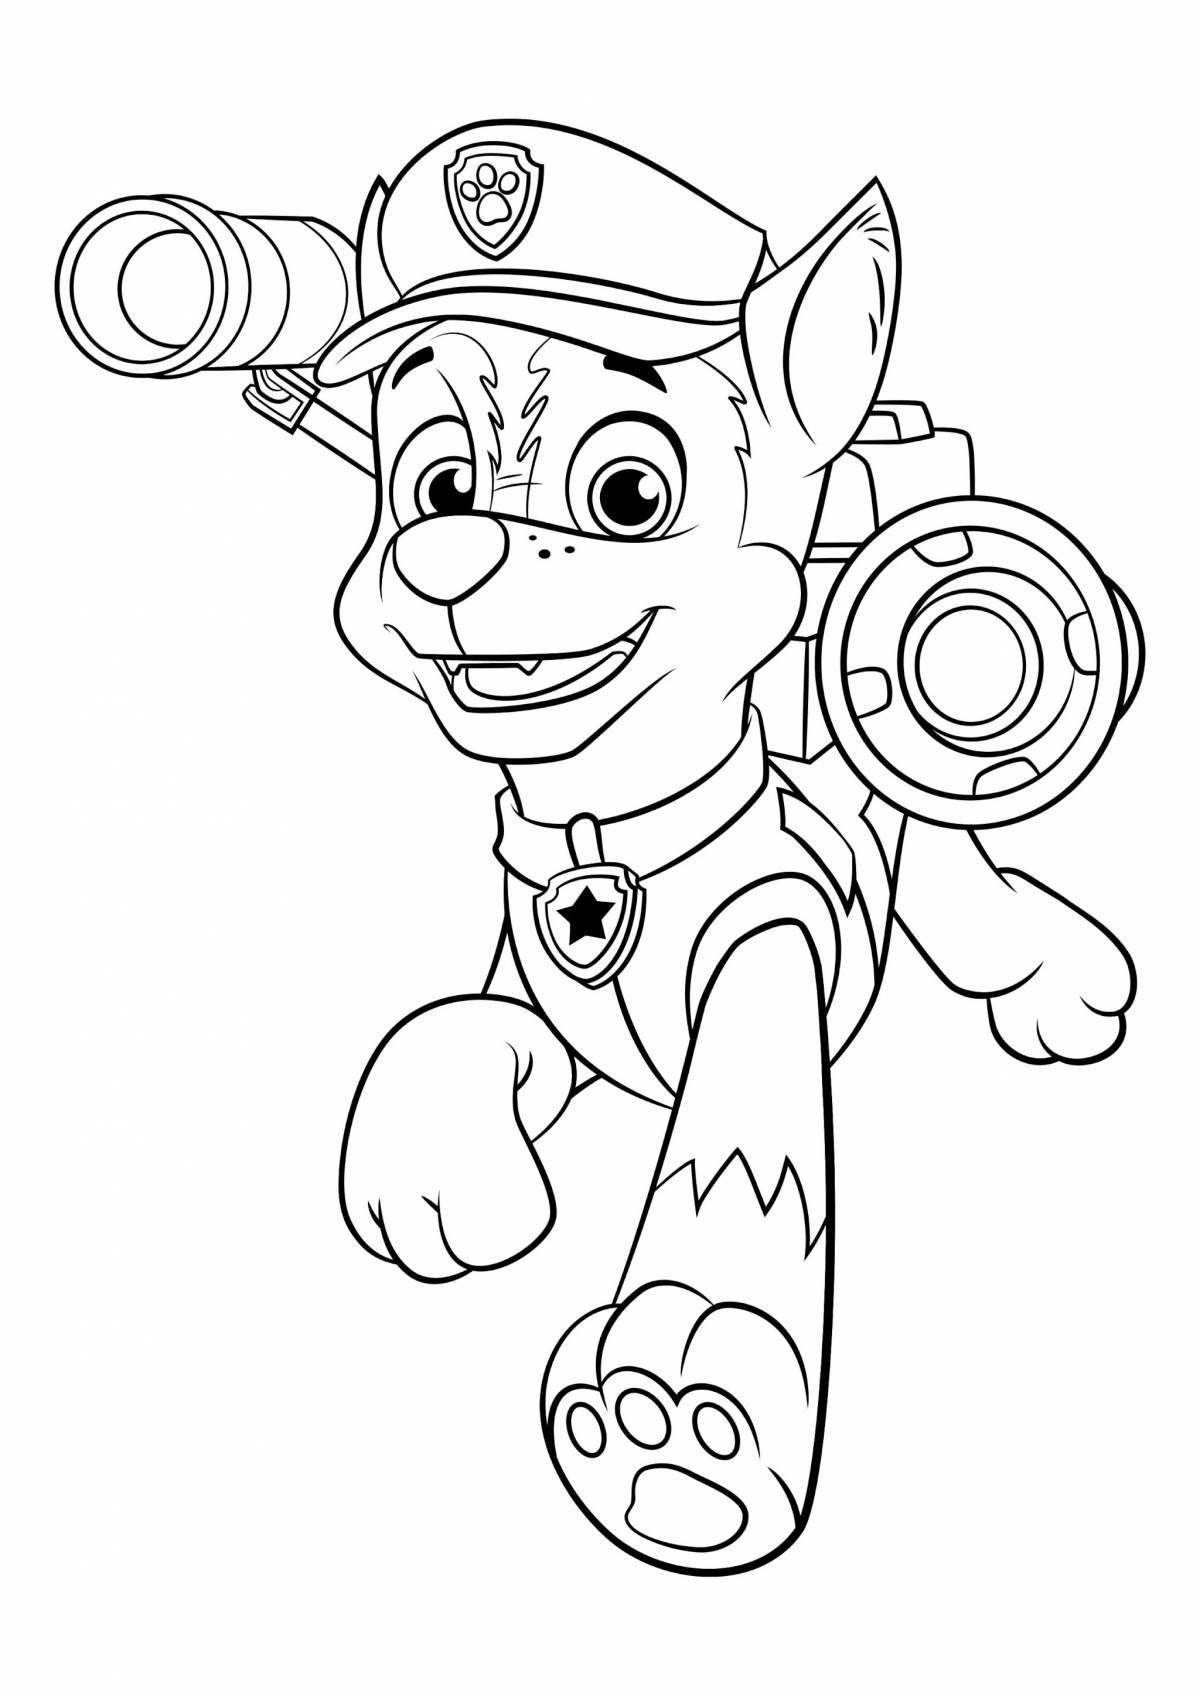 Live racer coloring pages for kids